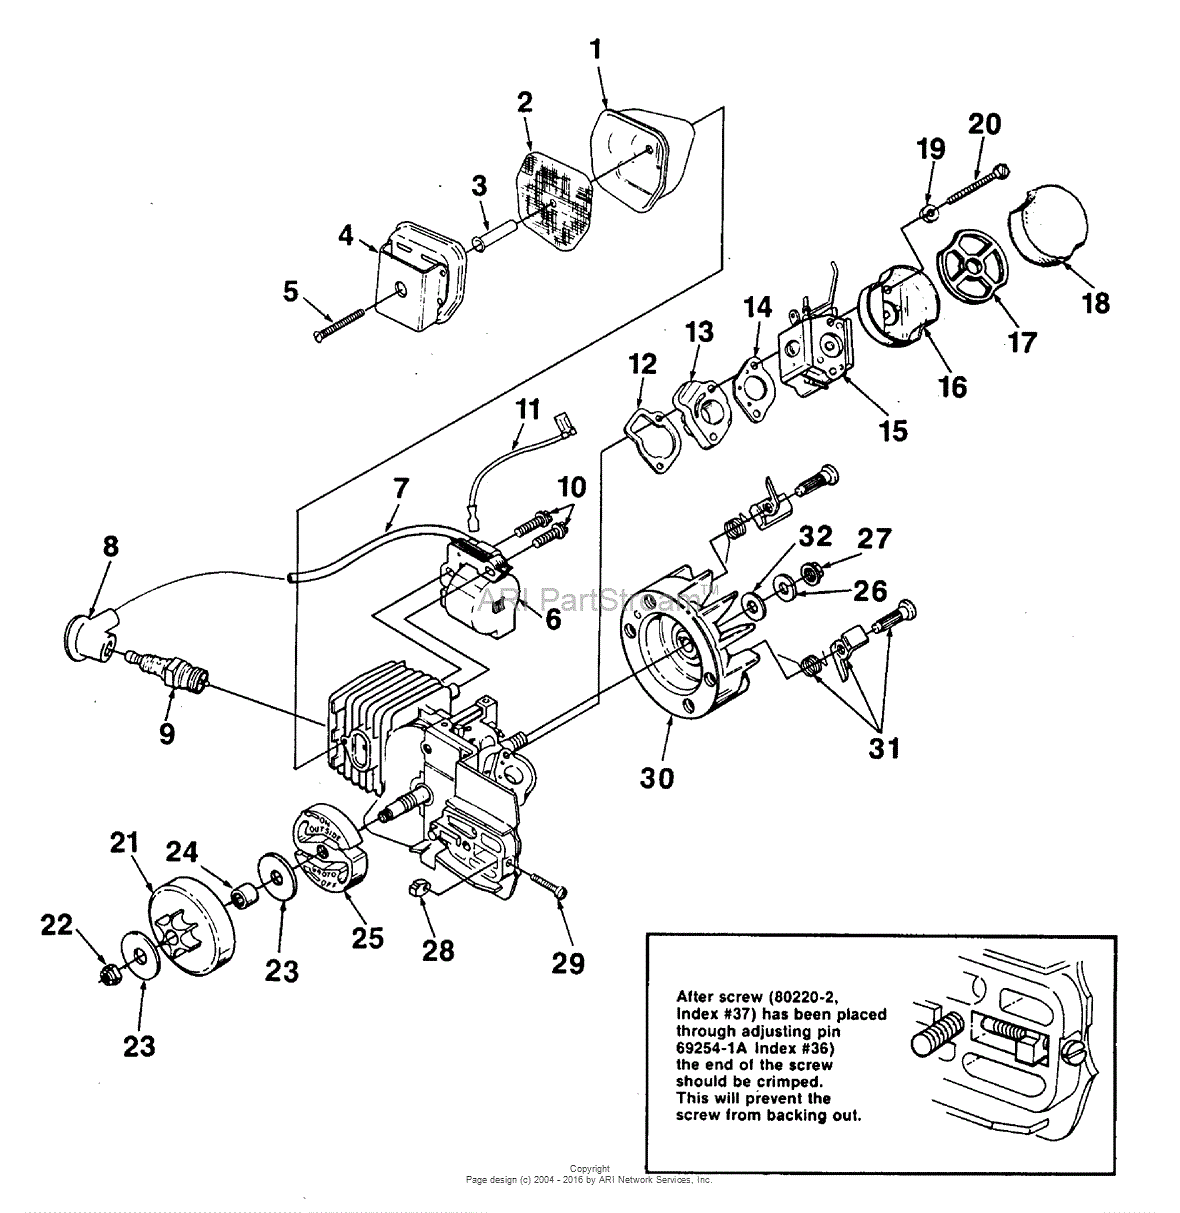 Homelite XL Chain Saw UT-10655 Parts Diagram for Peripheral Engine Part...